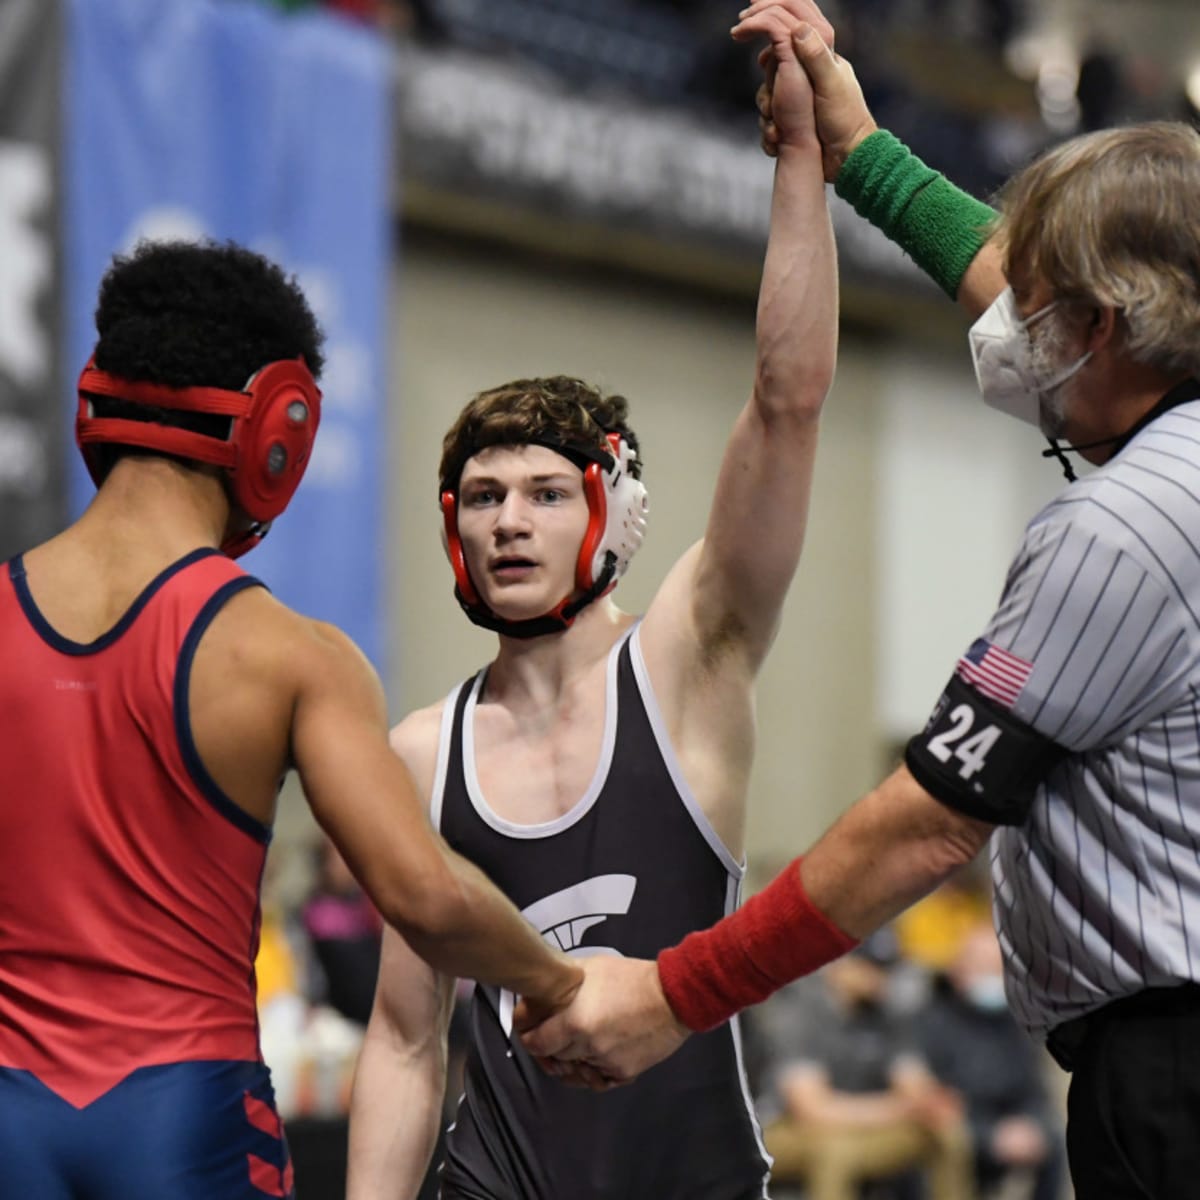 Toppenish boys roll to 4th straight wrestling state title, Zuniga brothers  complete trifecta, Sports